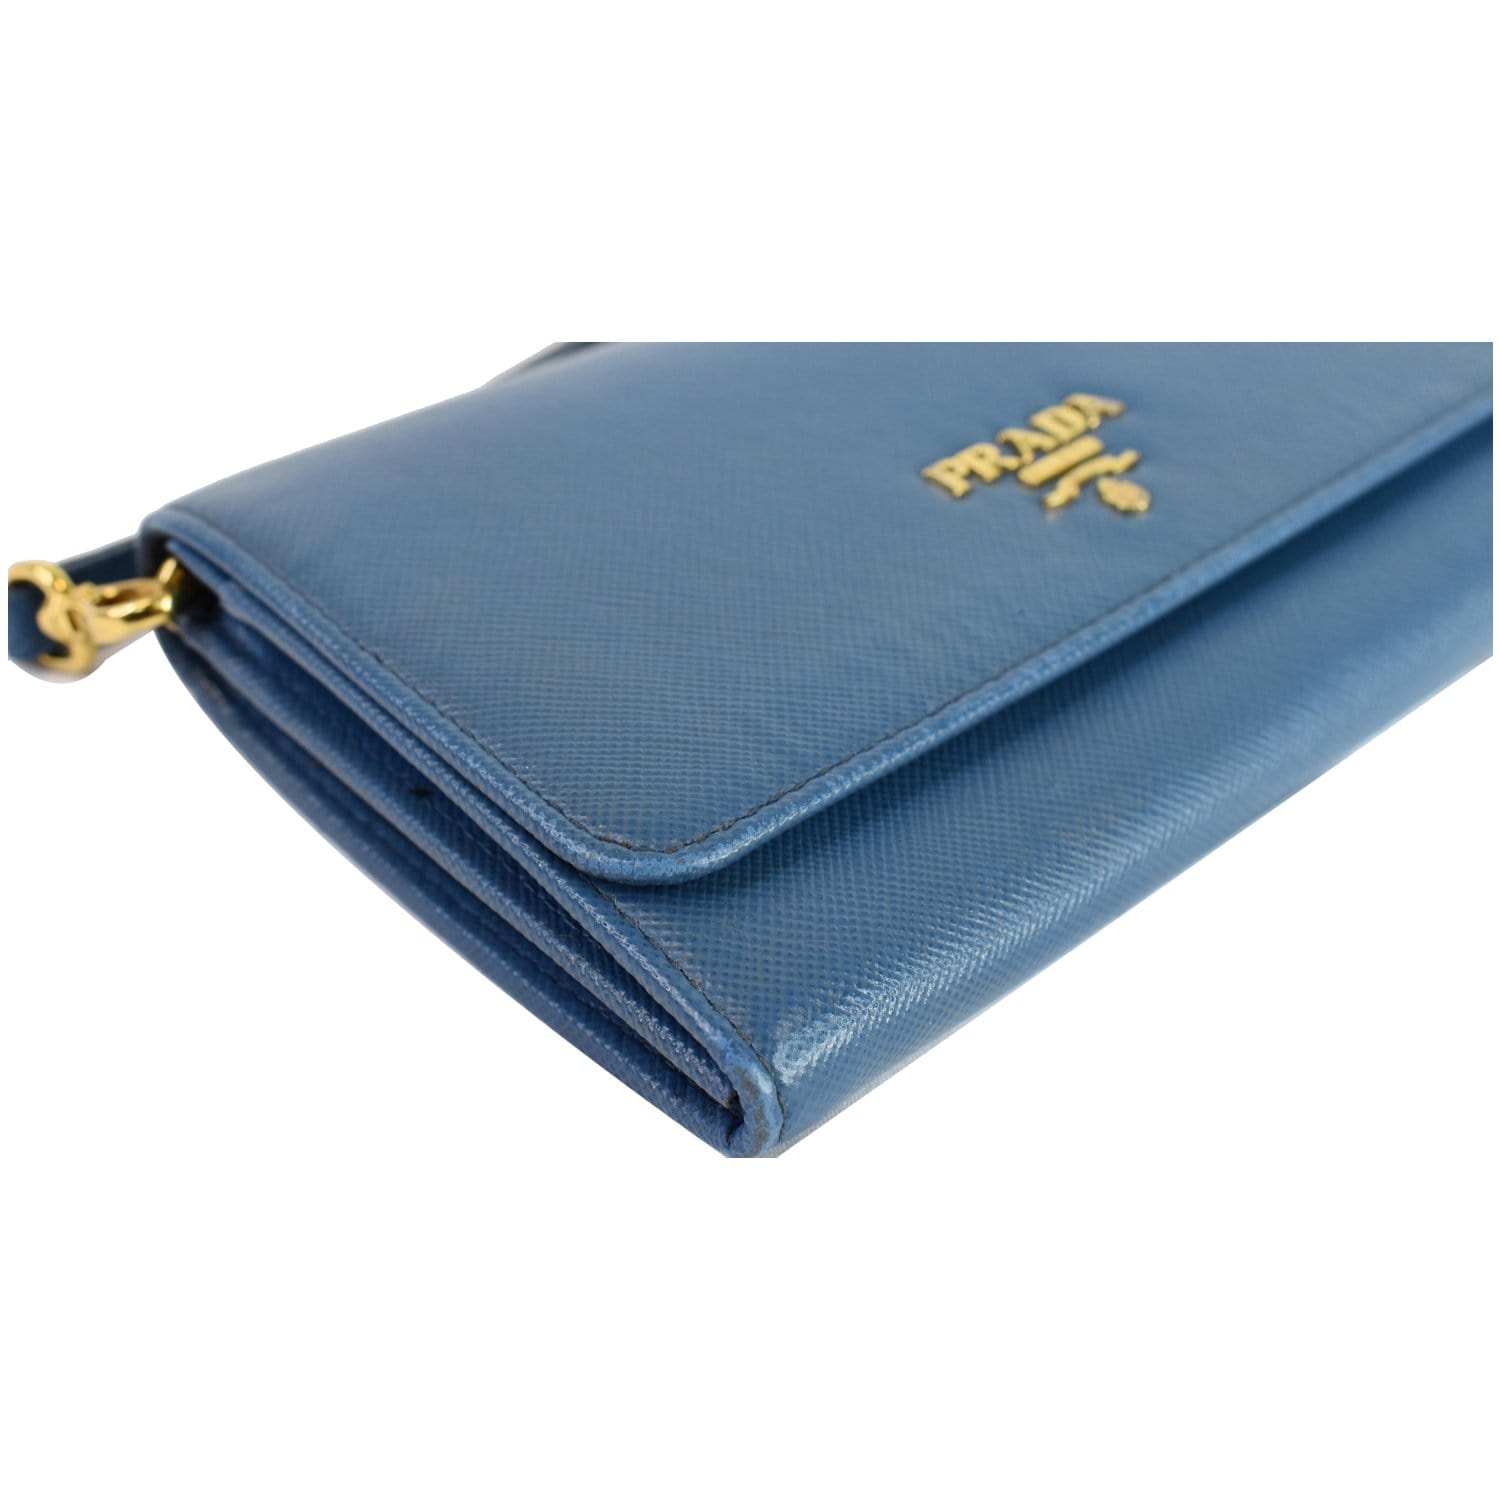 Prada, Bags, Prada Saffiano Cobalt Blue Leather Bifold Wallet With  Zippered Coin Compartment